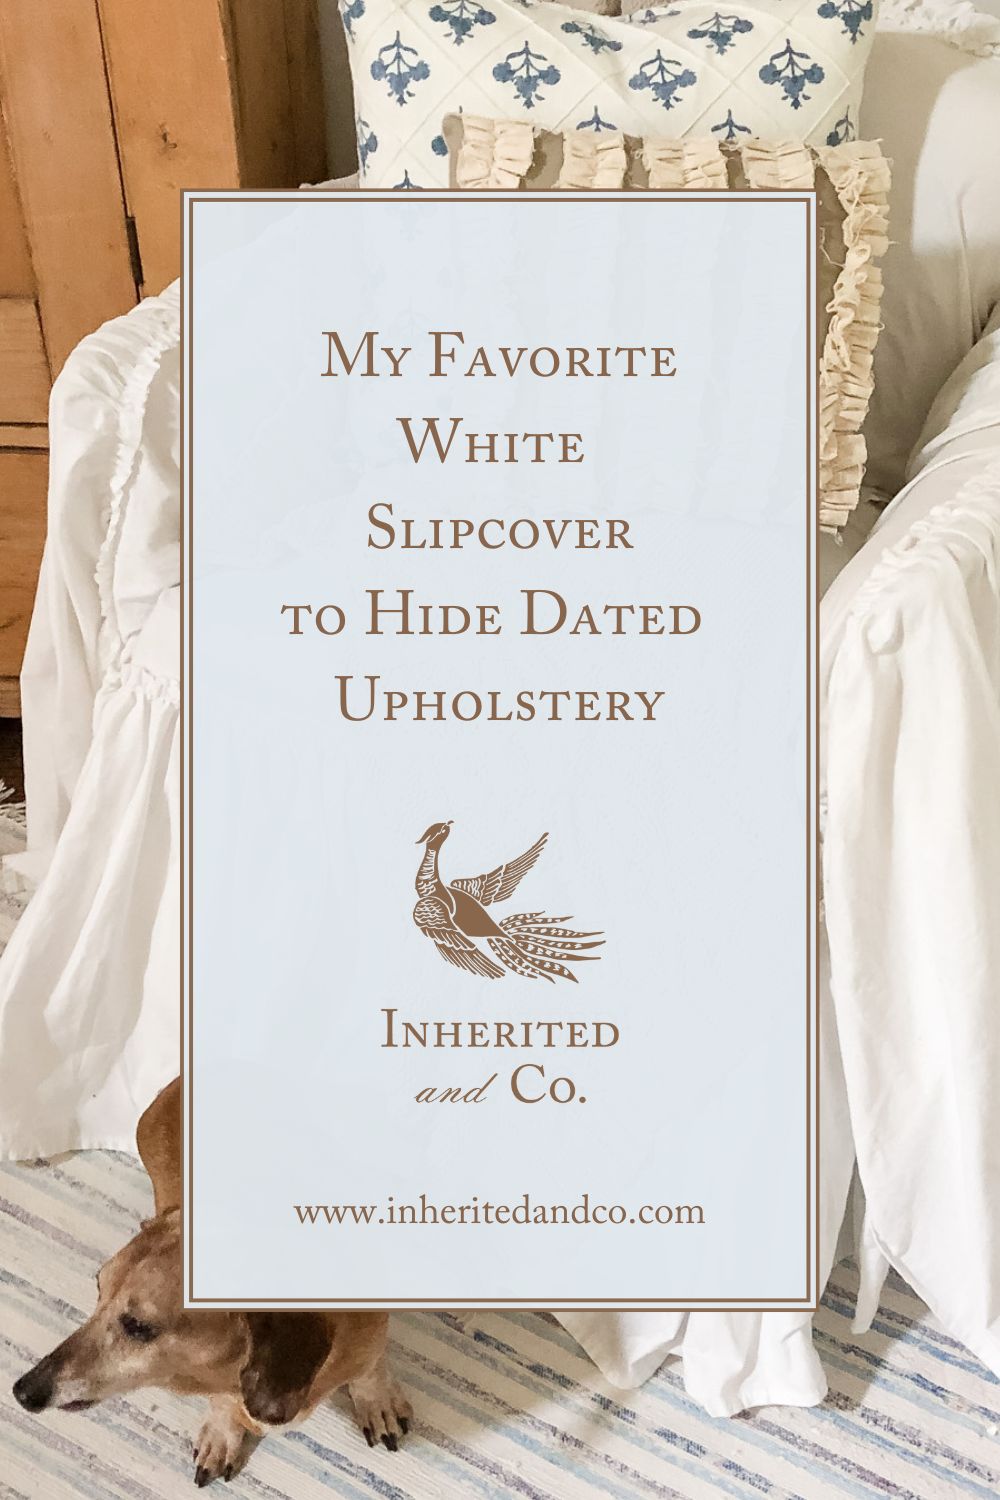 "My Favorite White Slipcover to Hide Dated Upholstery"